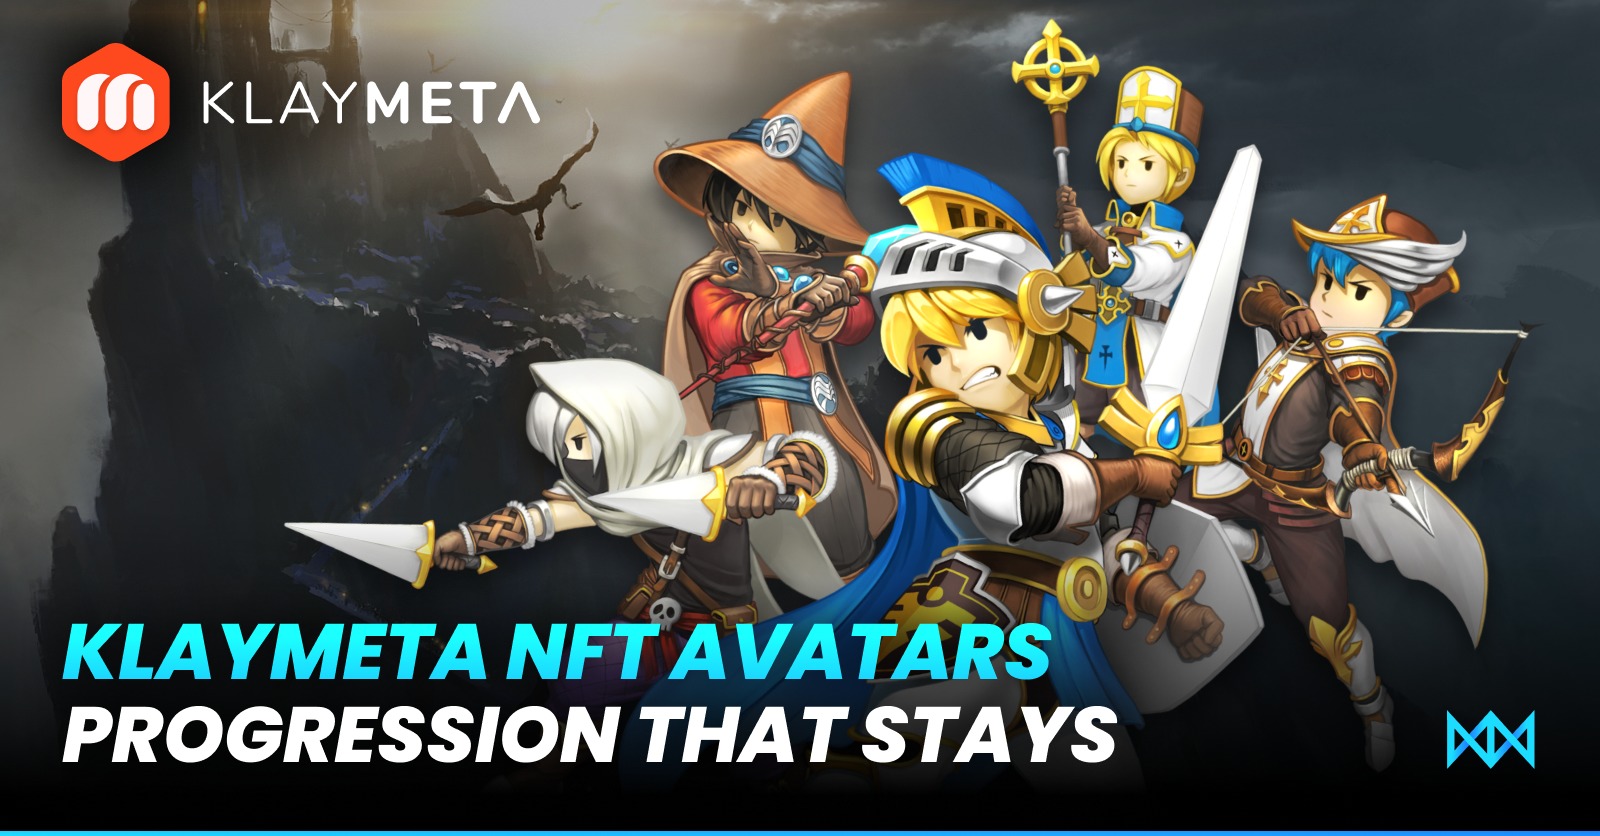 KLAYMETA Solidifies Existence of Its NFT In-game Assets